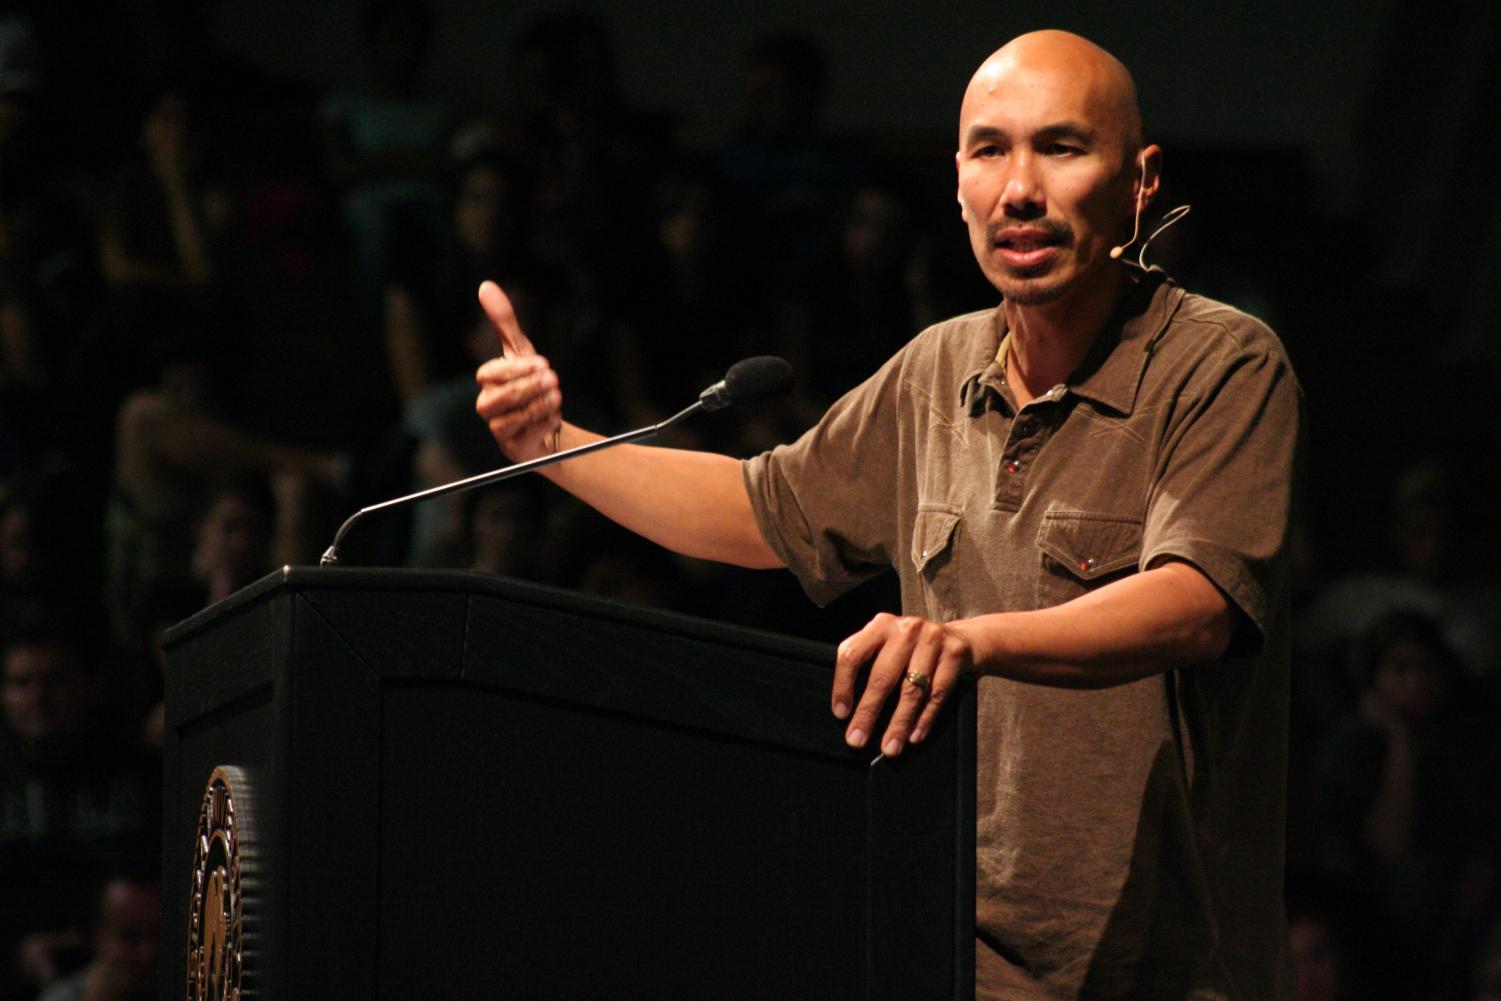 Francis Chan speaks Thursday night about humility.